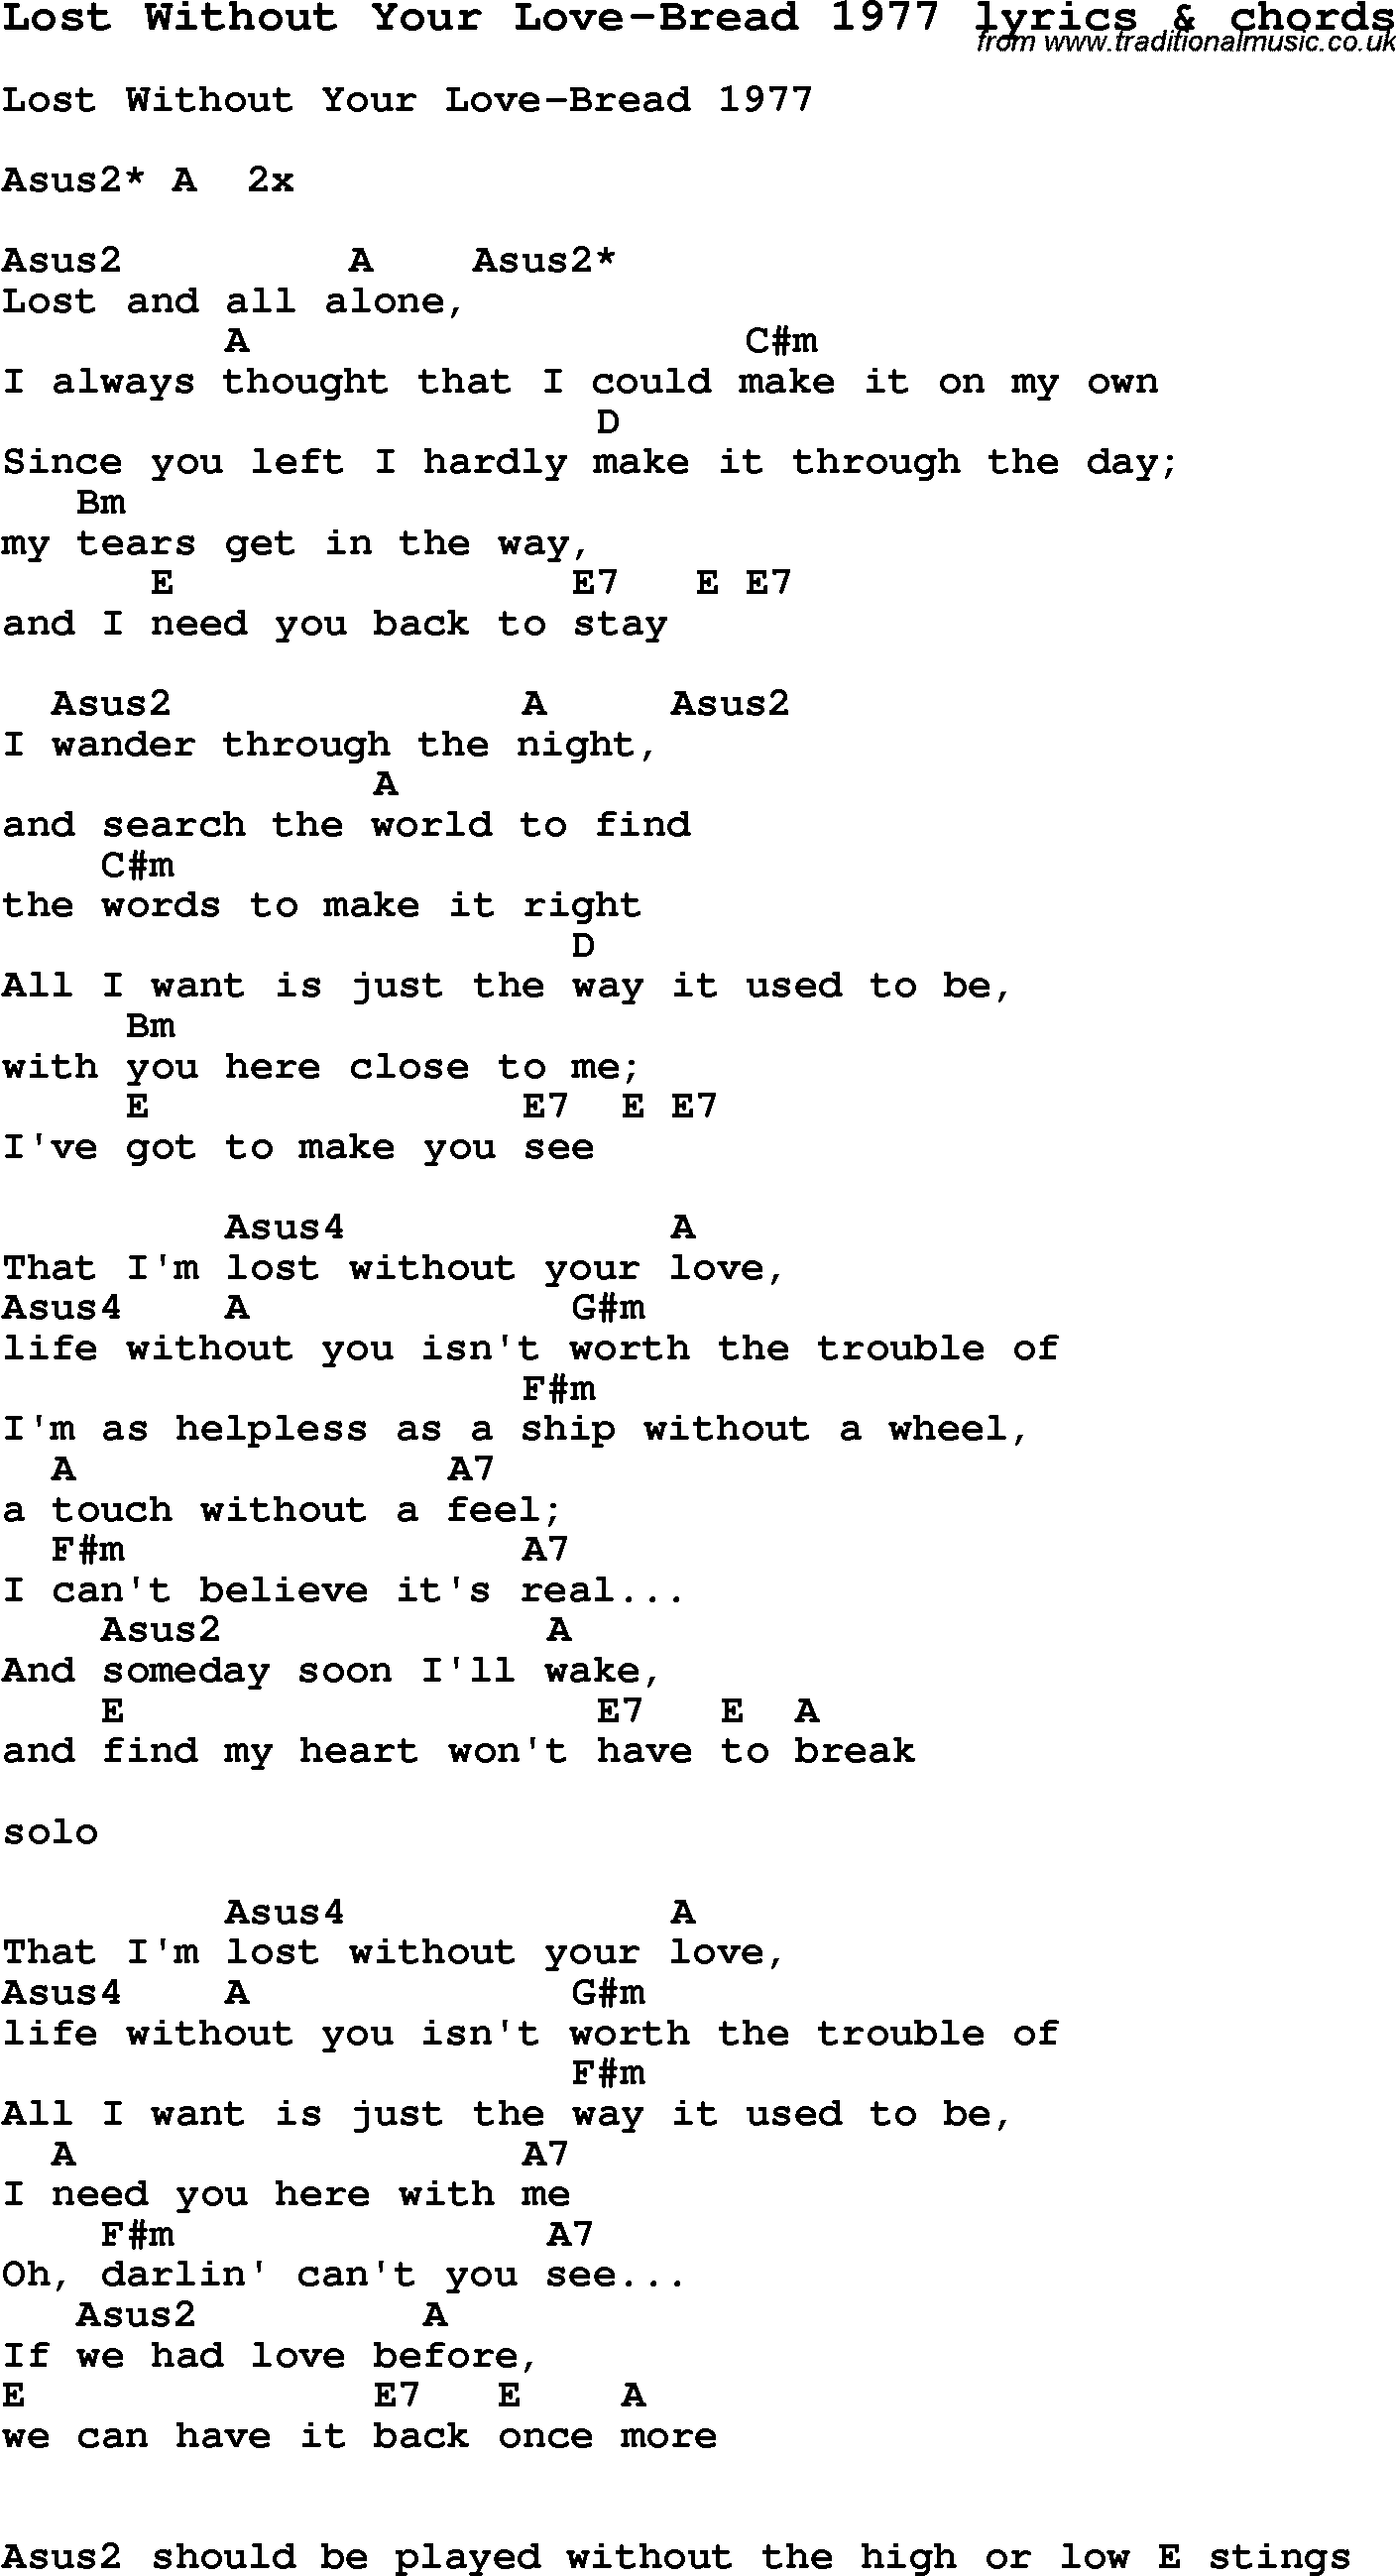 Love Song Lyrics for: Lost Without Your Love-Bread 1977 with chords for Ukulele, Guitar Banjo etc.